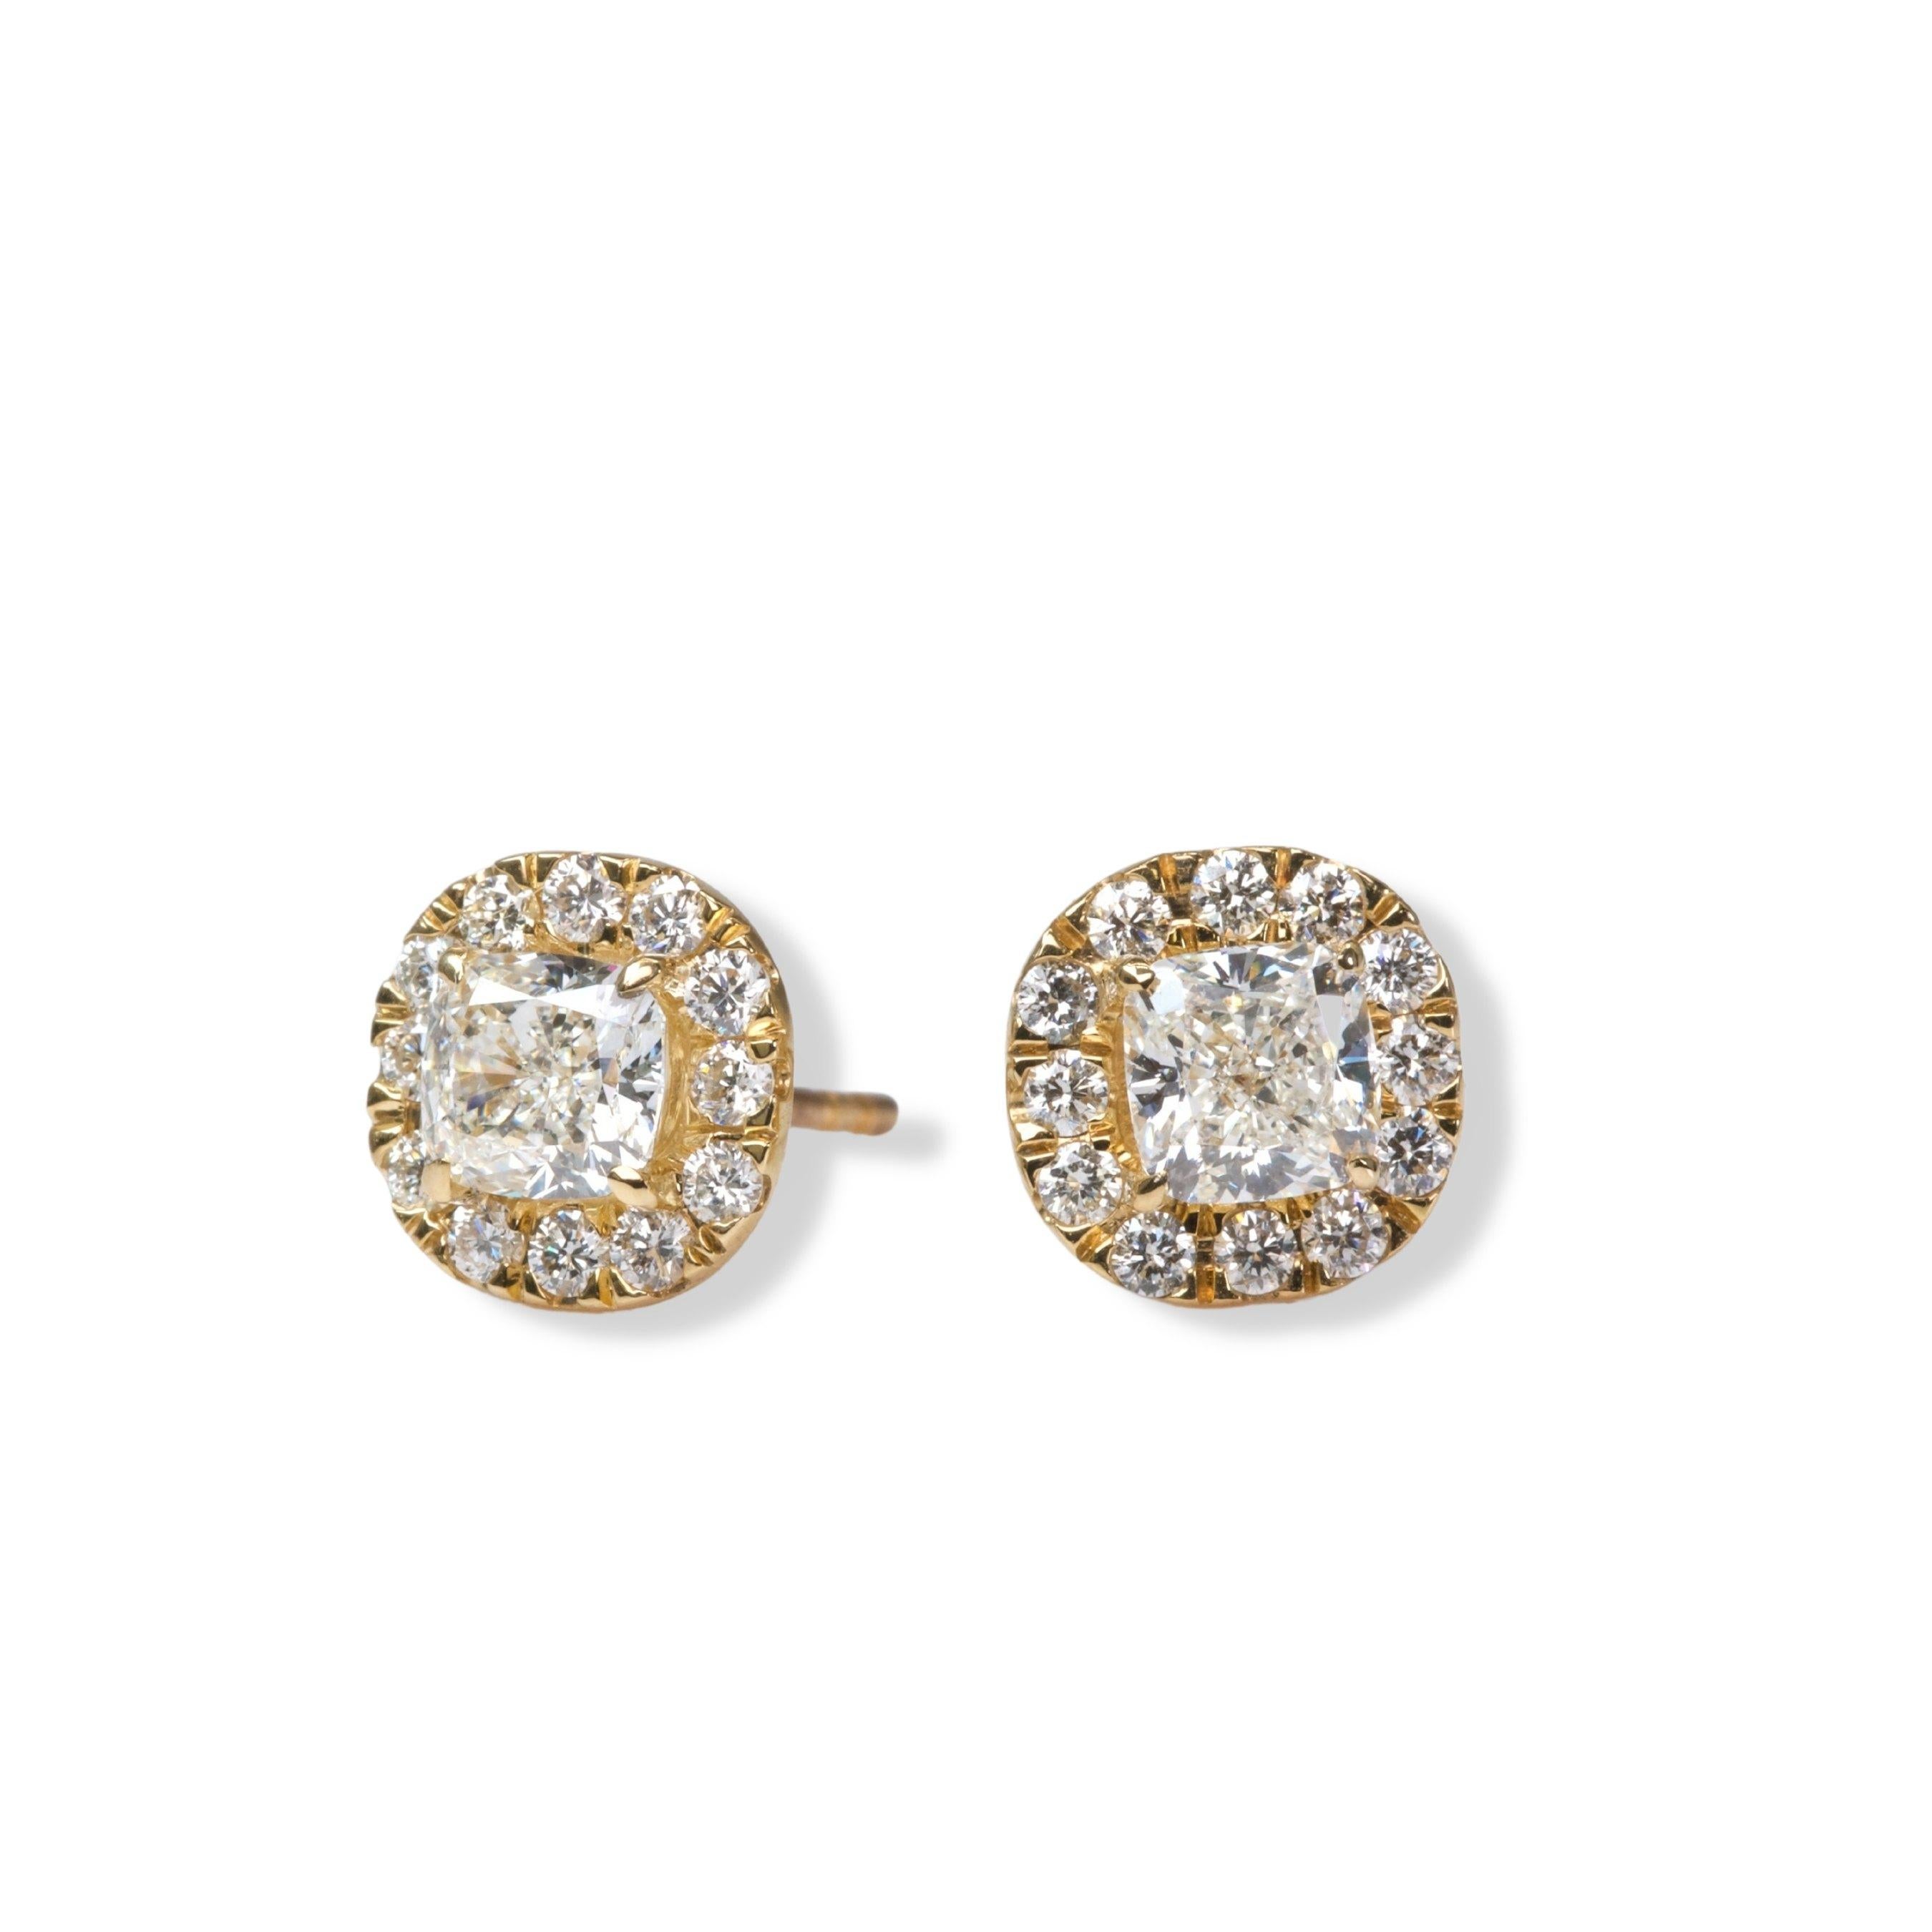 Sparkling 18k Yellow Gold Stud Halo Earrings with 1.40 Diamonds, GIA certificate For Sale 4